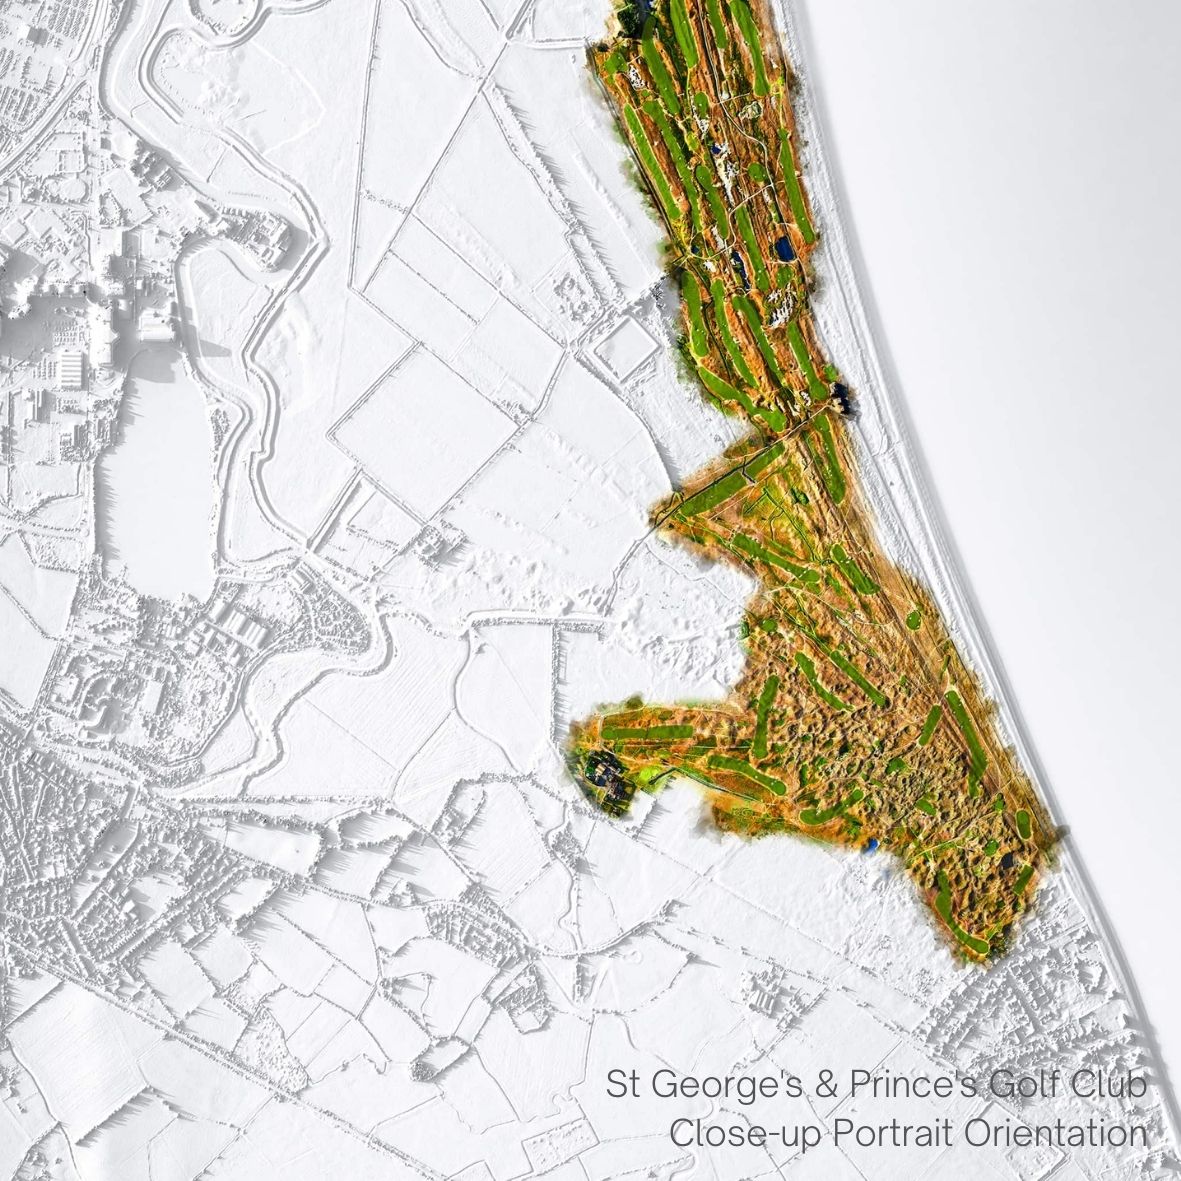 Limited Edition, Only 5 Left - Kent Golf Clubs 3D WaterMap Compilation